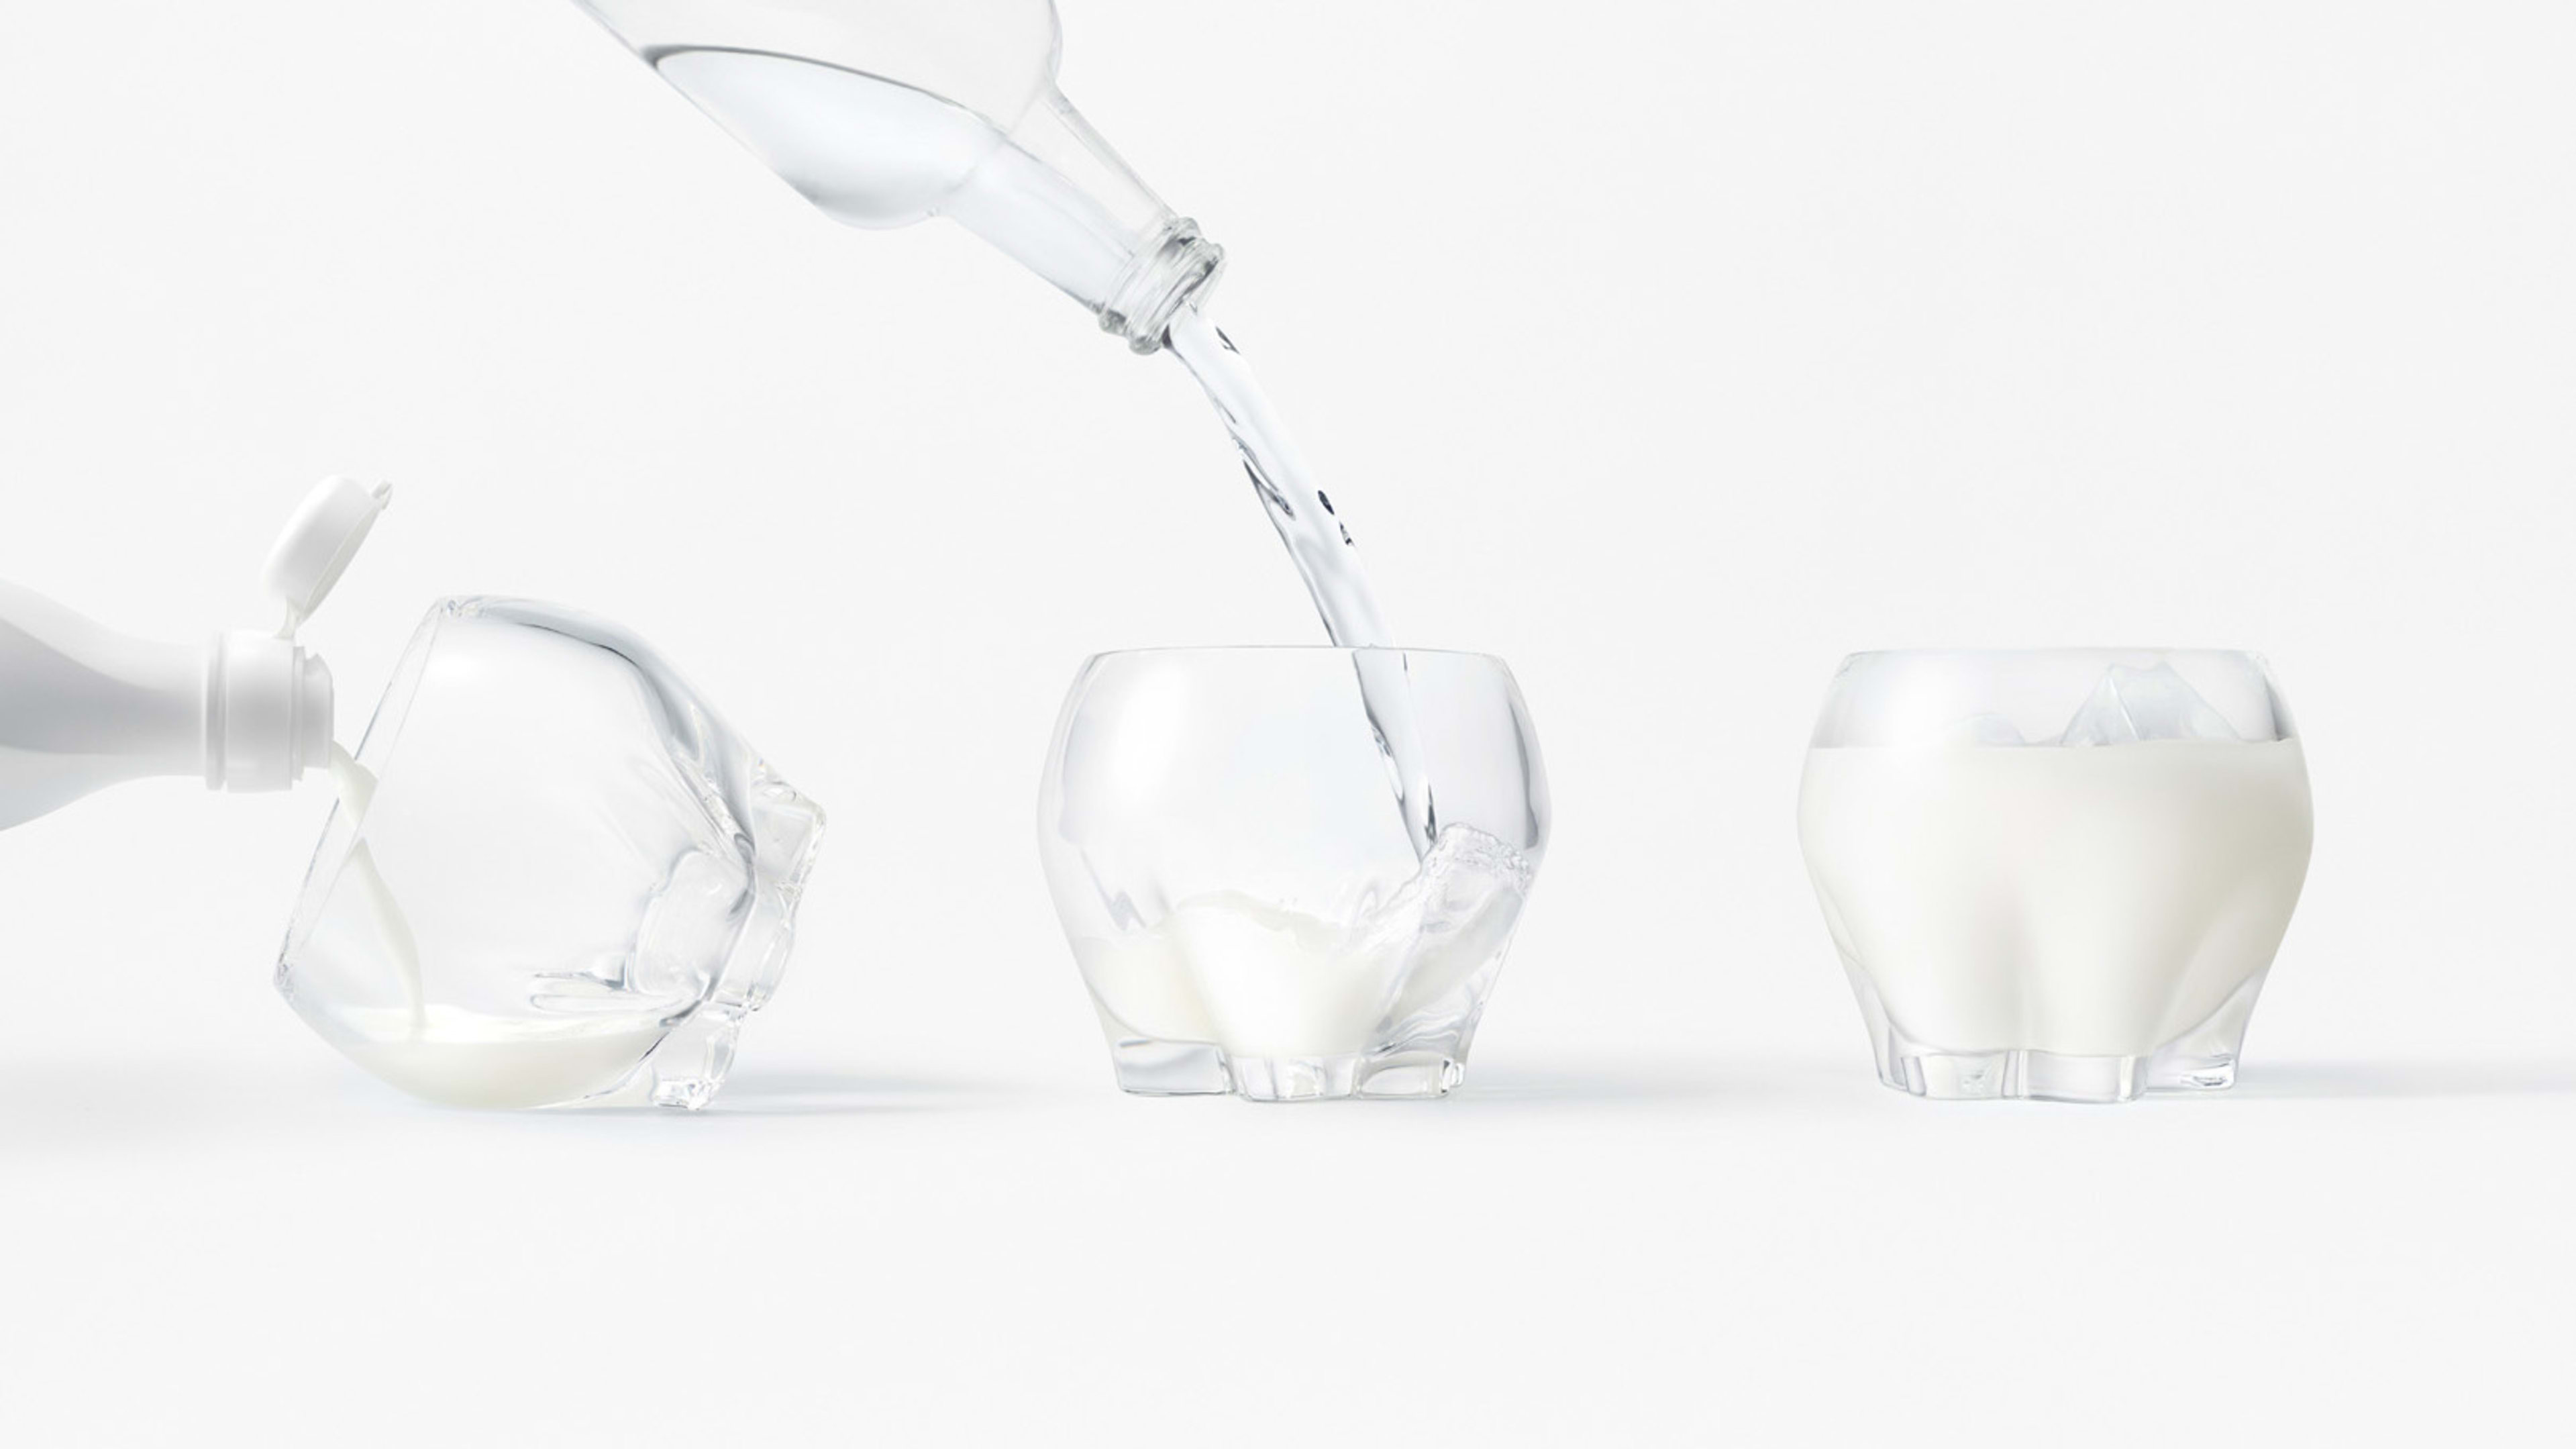 This elegant glass is just for drinking Japan’s unofficial national beverage